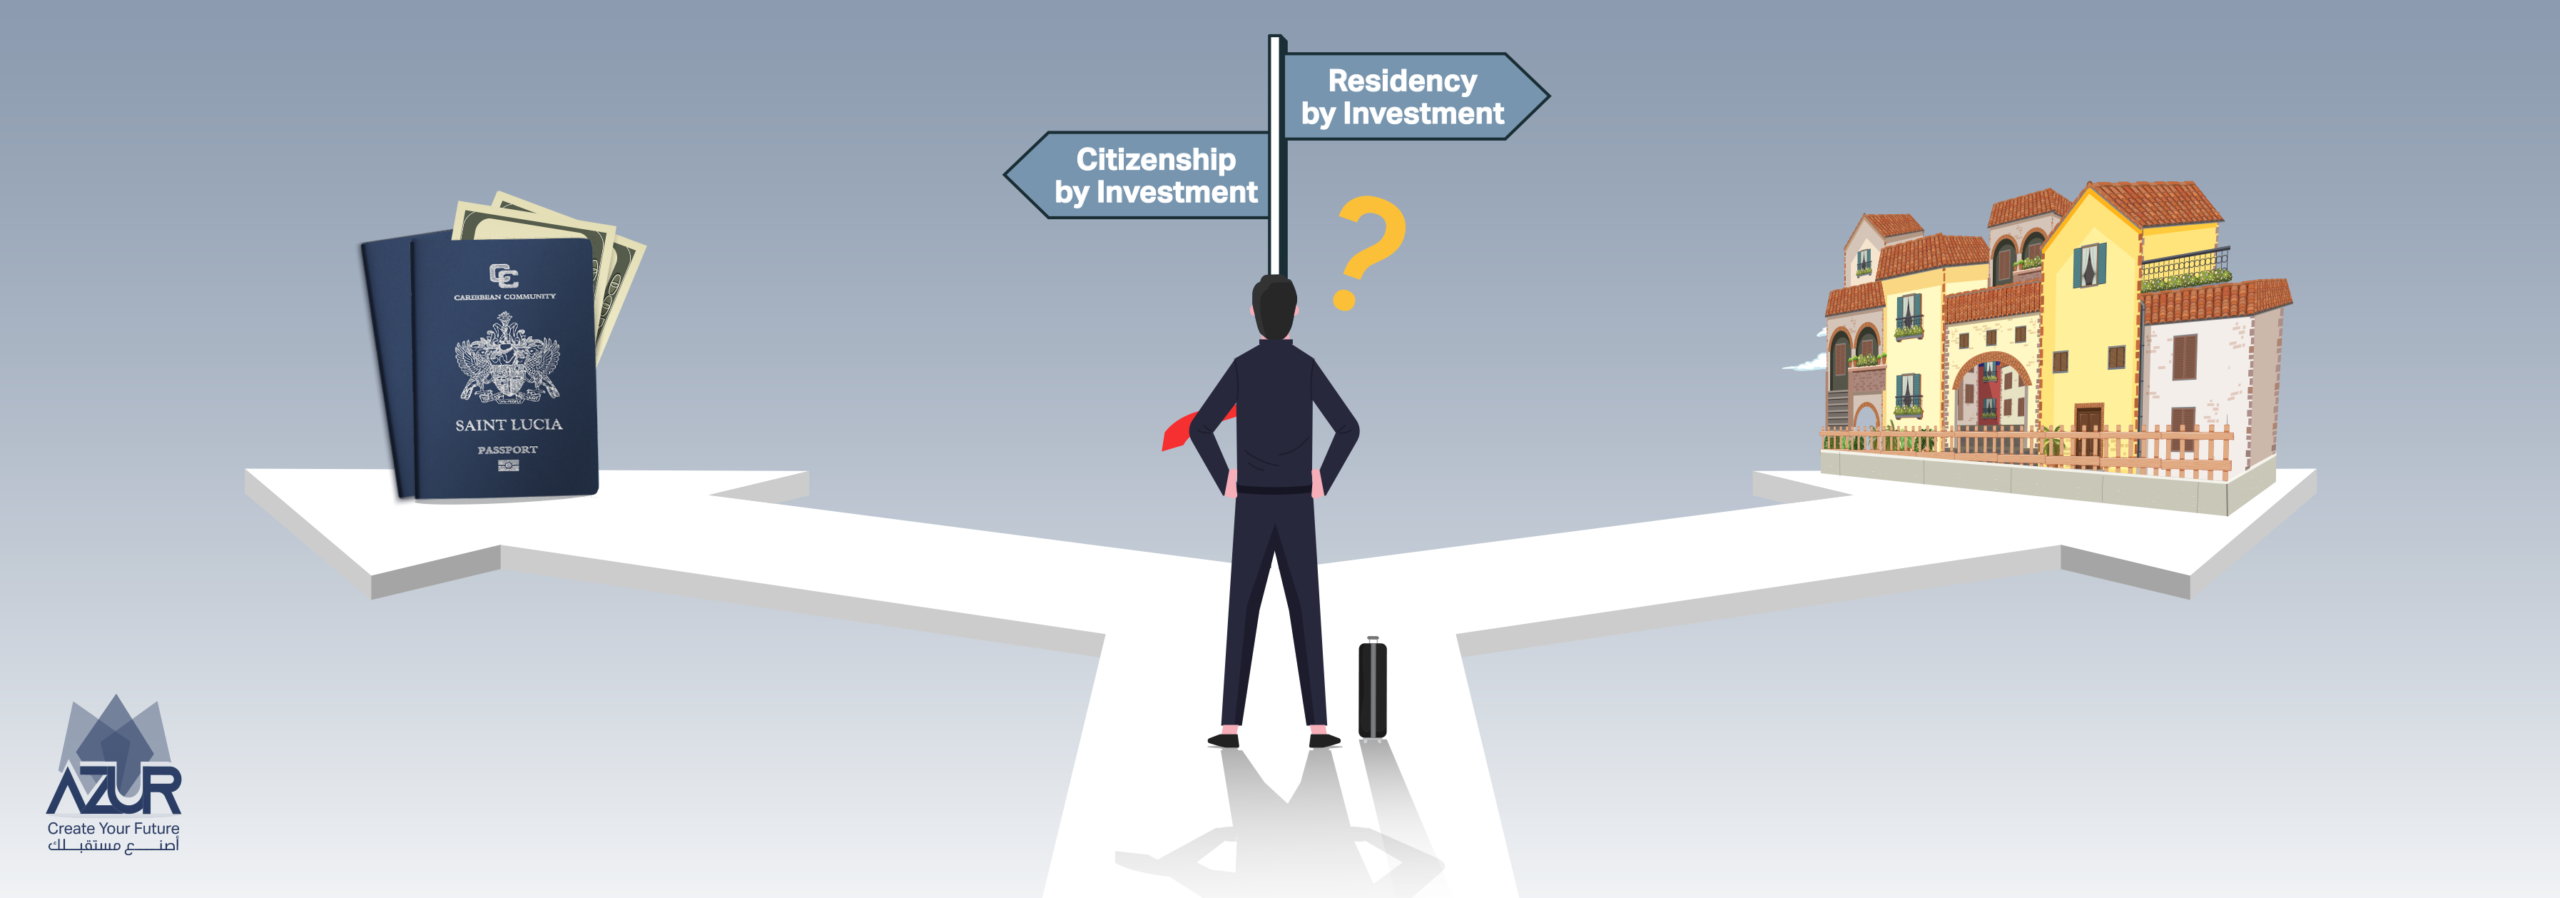 Citizenship by Investment vs Residency by Investment: Which is the Best Option for You?